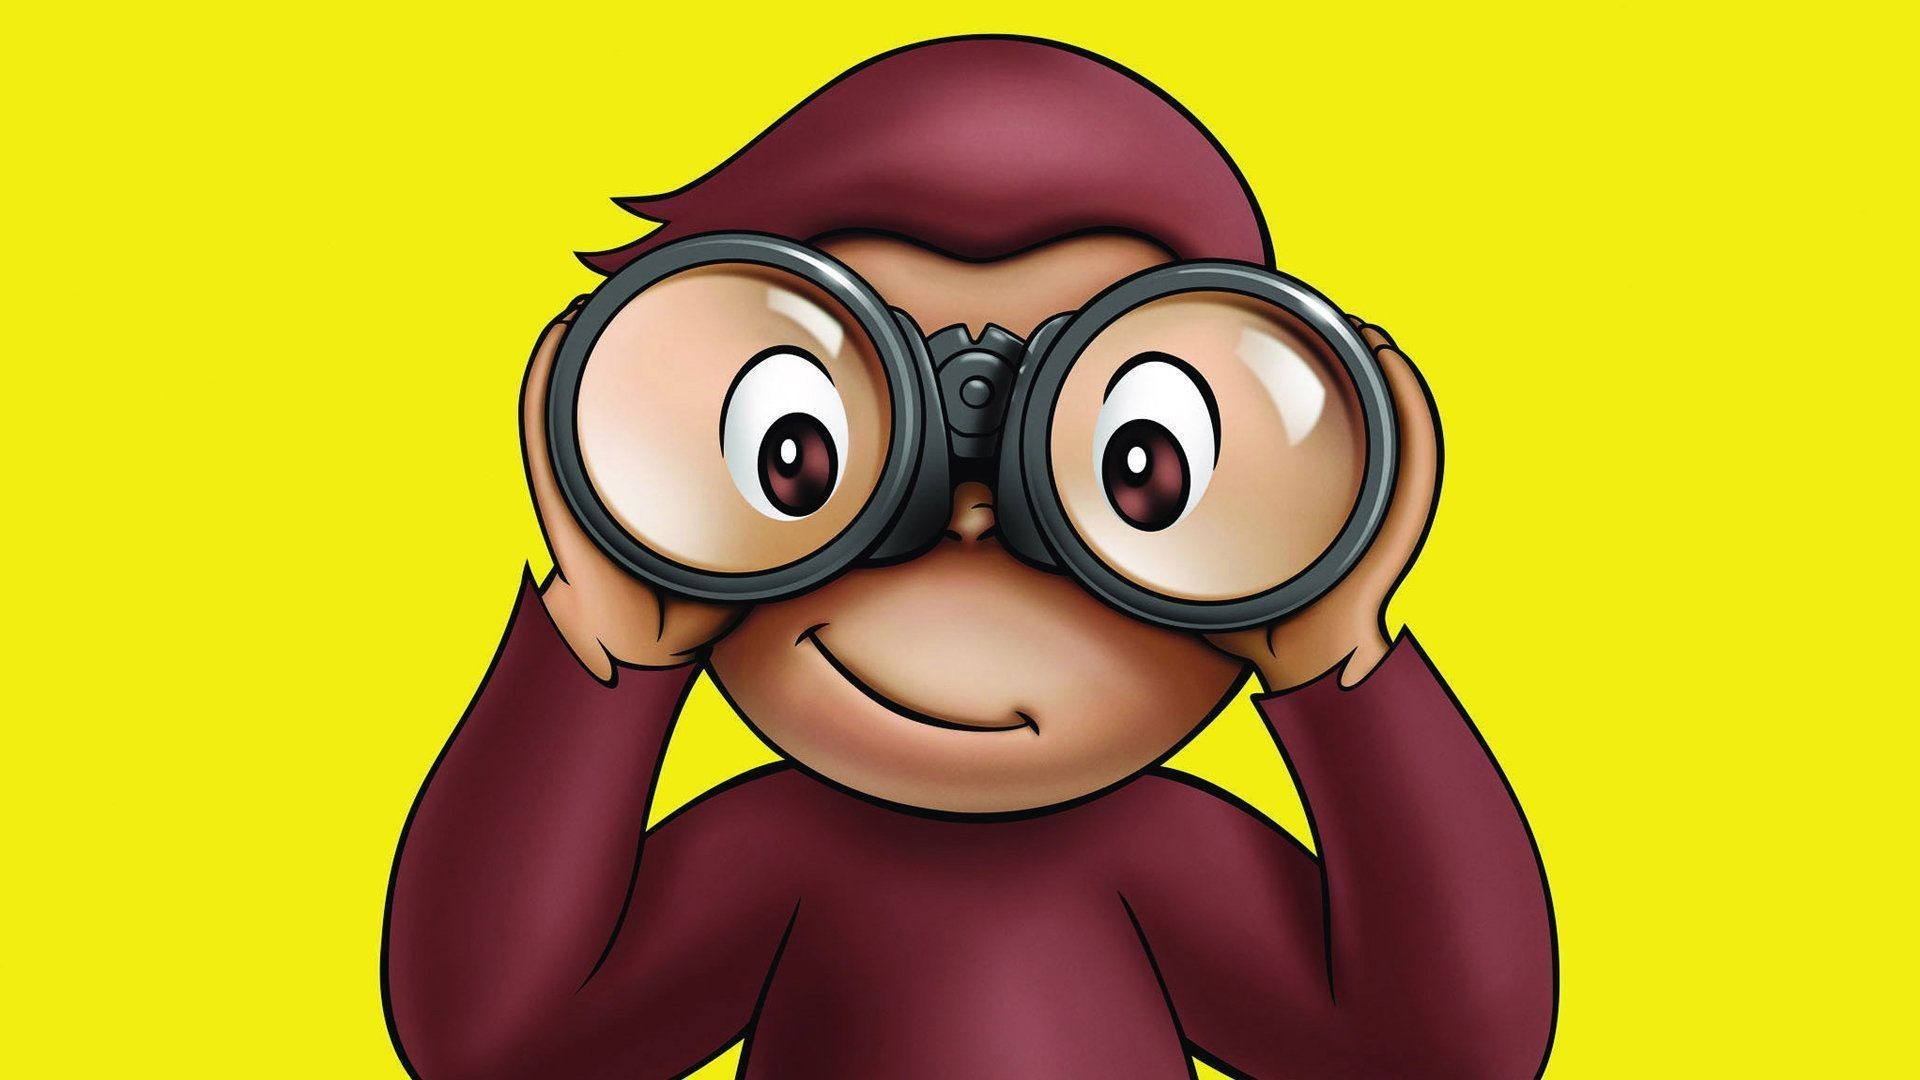 POP CULTURE. New “Curious George” movie debuts Sept. 8 on Peacock streaming service